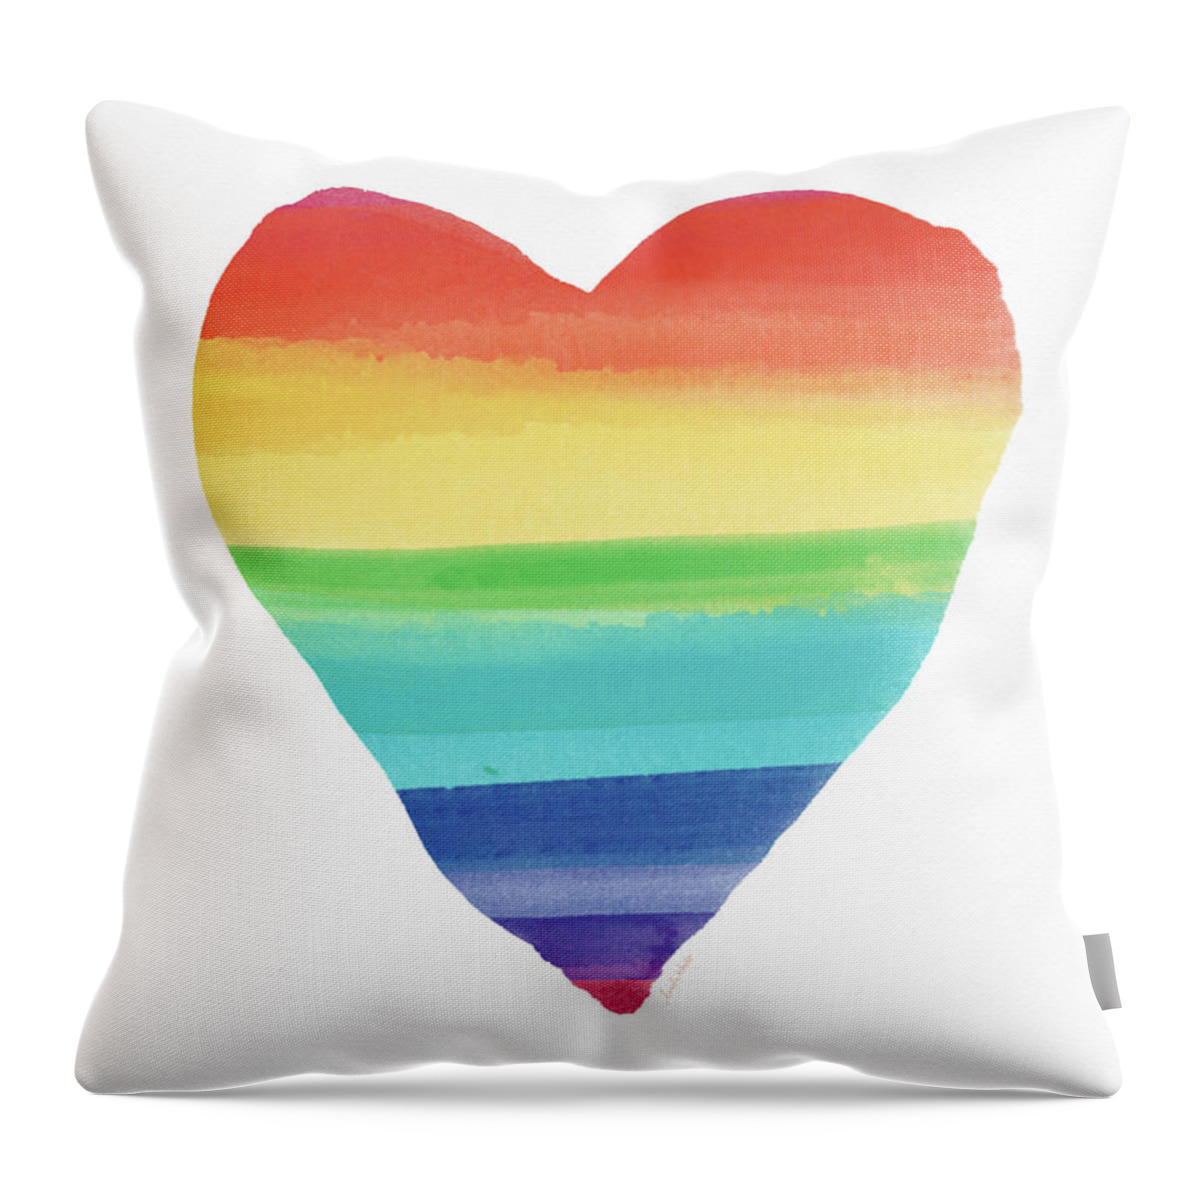 Heart Throw Pillow featuring the painting Rainbow Heart- Art by Linda Woods by Linda Woods